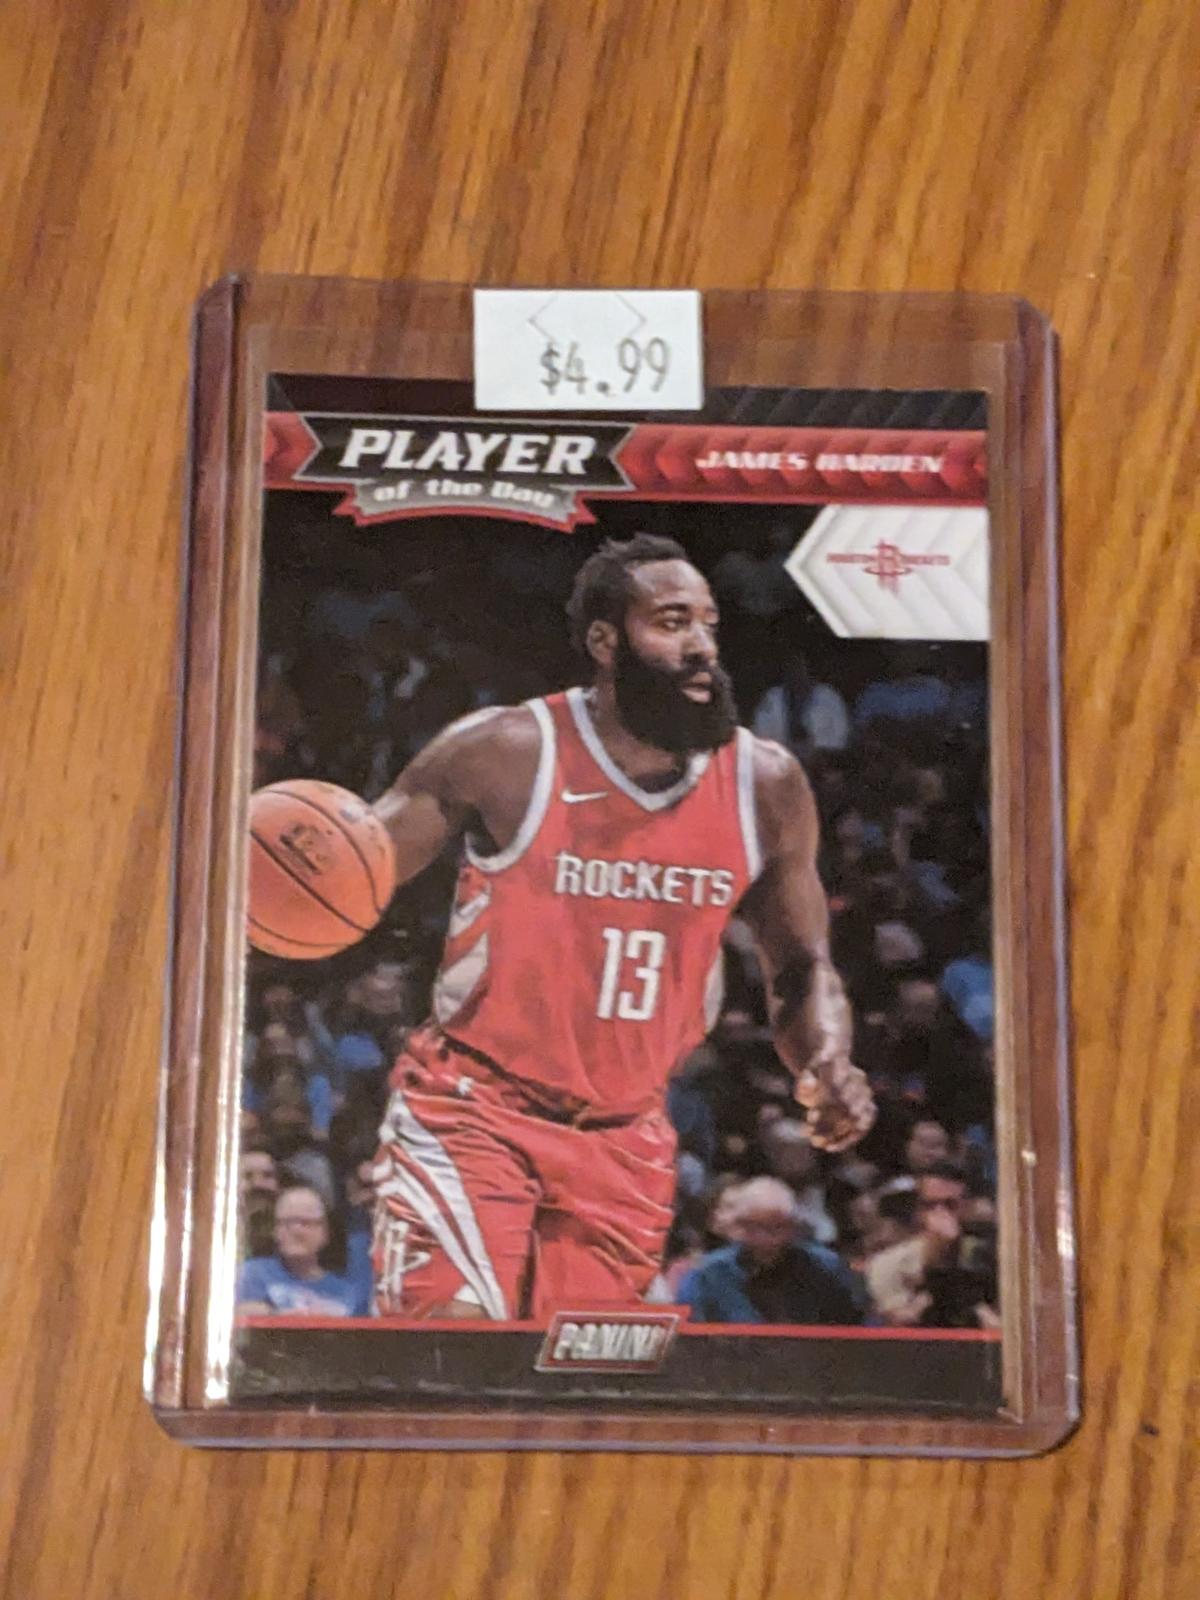 2017-18 Panini PLAYER OF THE DAY #14 JAMES HARDEN 76ers